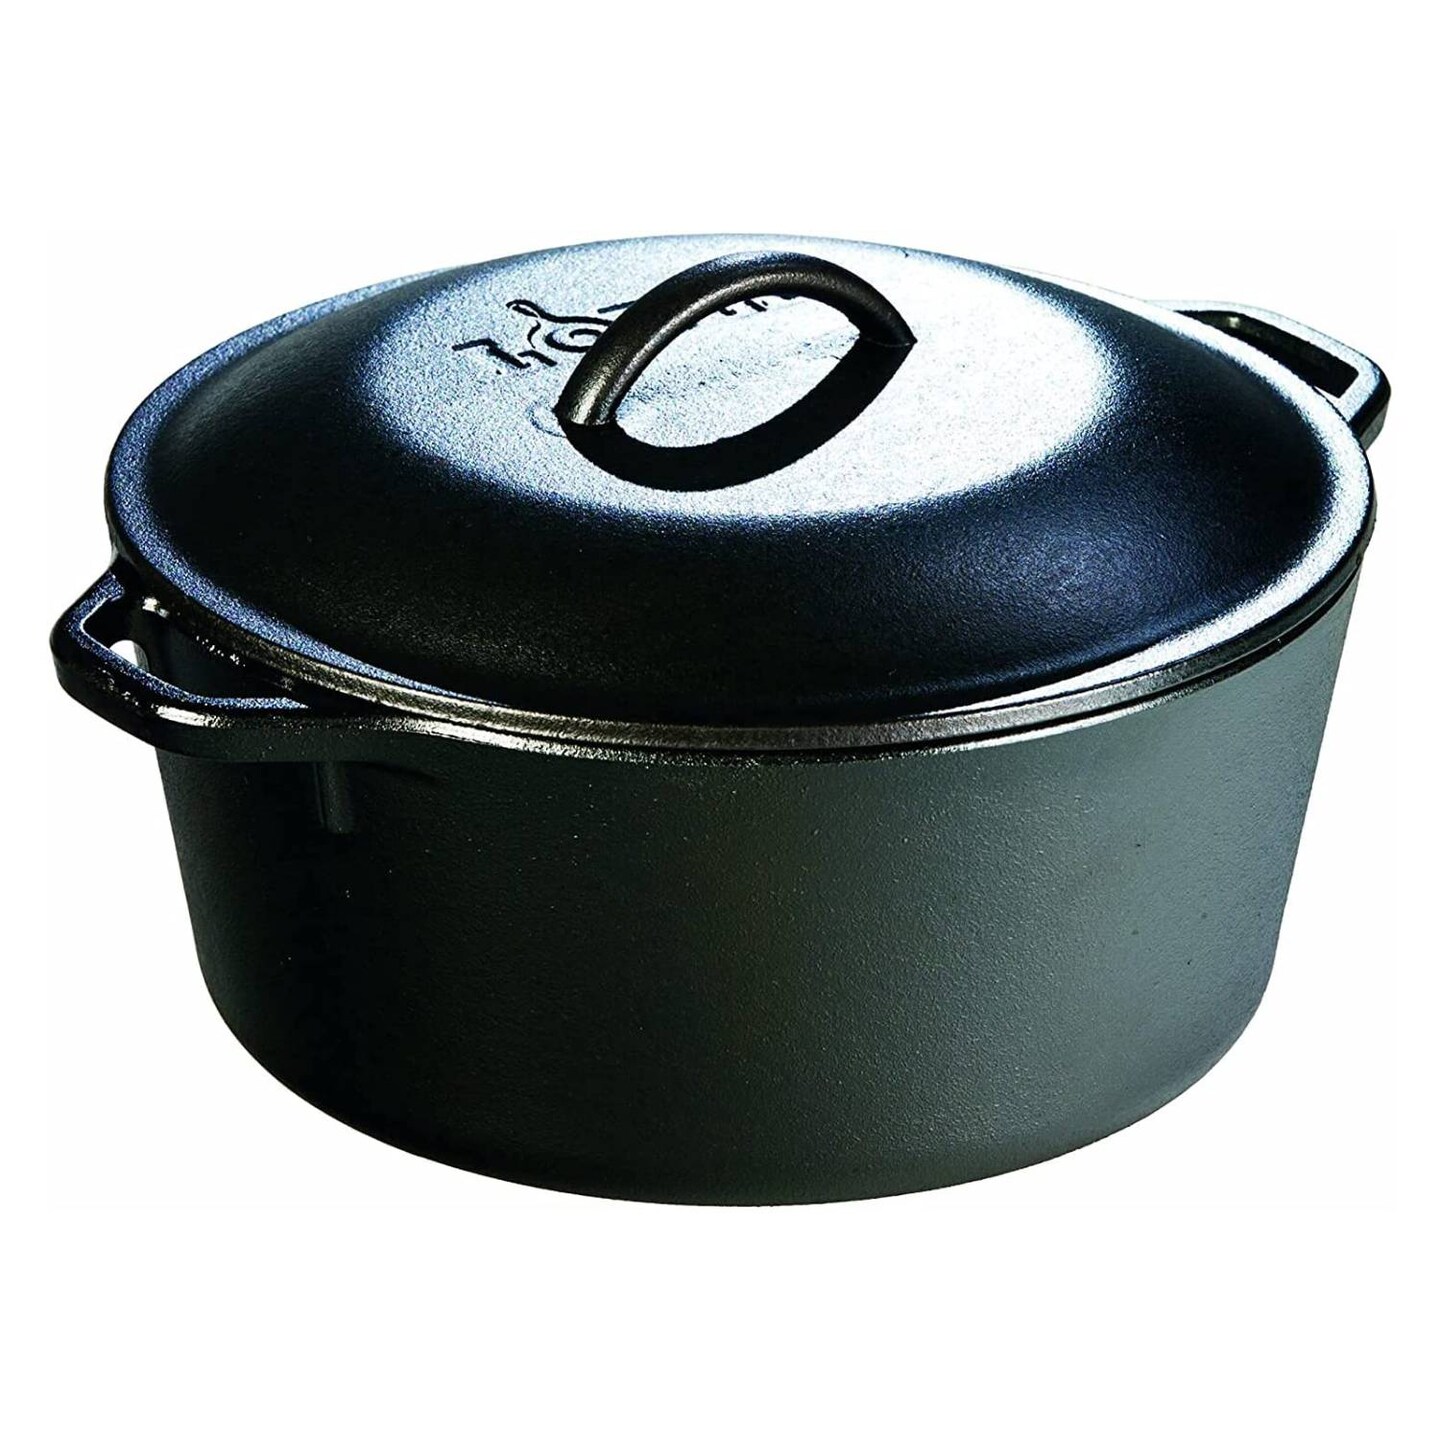 Cooks Cast Iron Dutch Oven with Lid